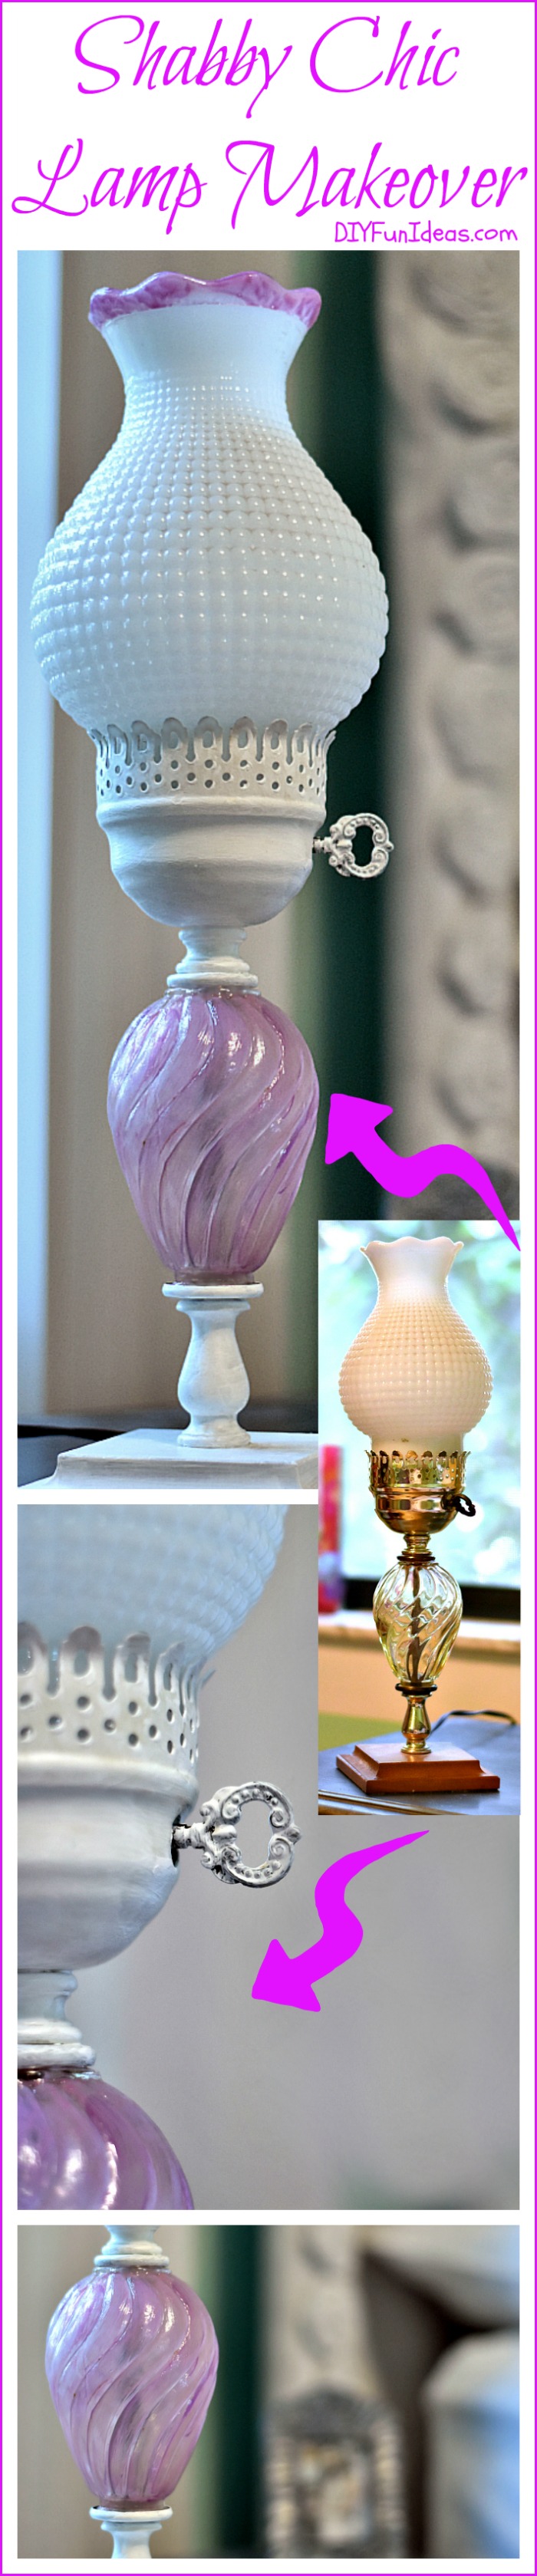 DIY SUPER CUTE SHABBY CHIC LAMP MAKEOVER